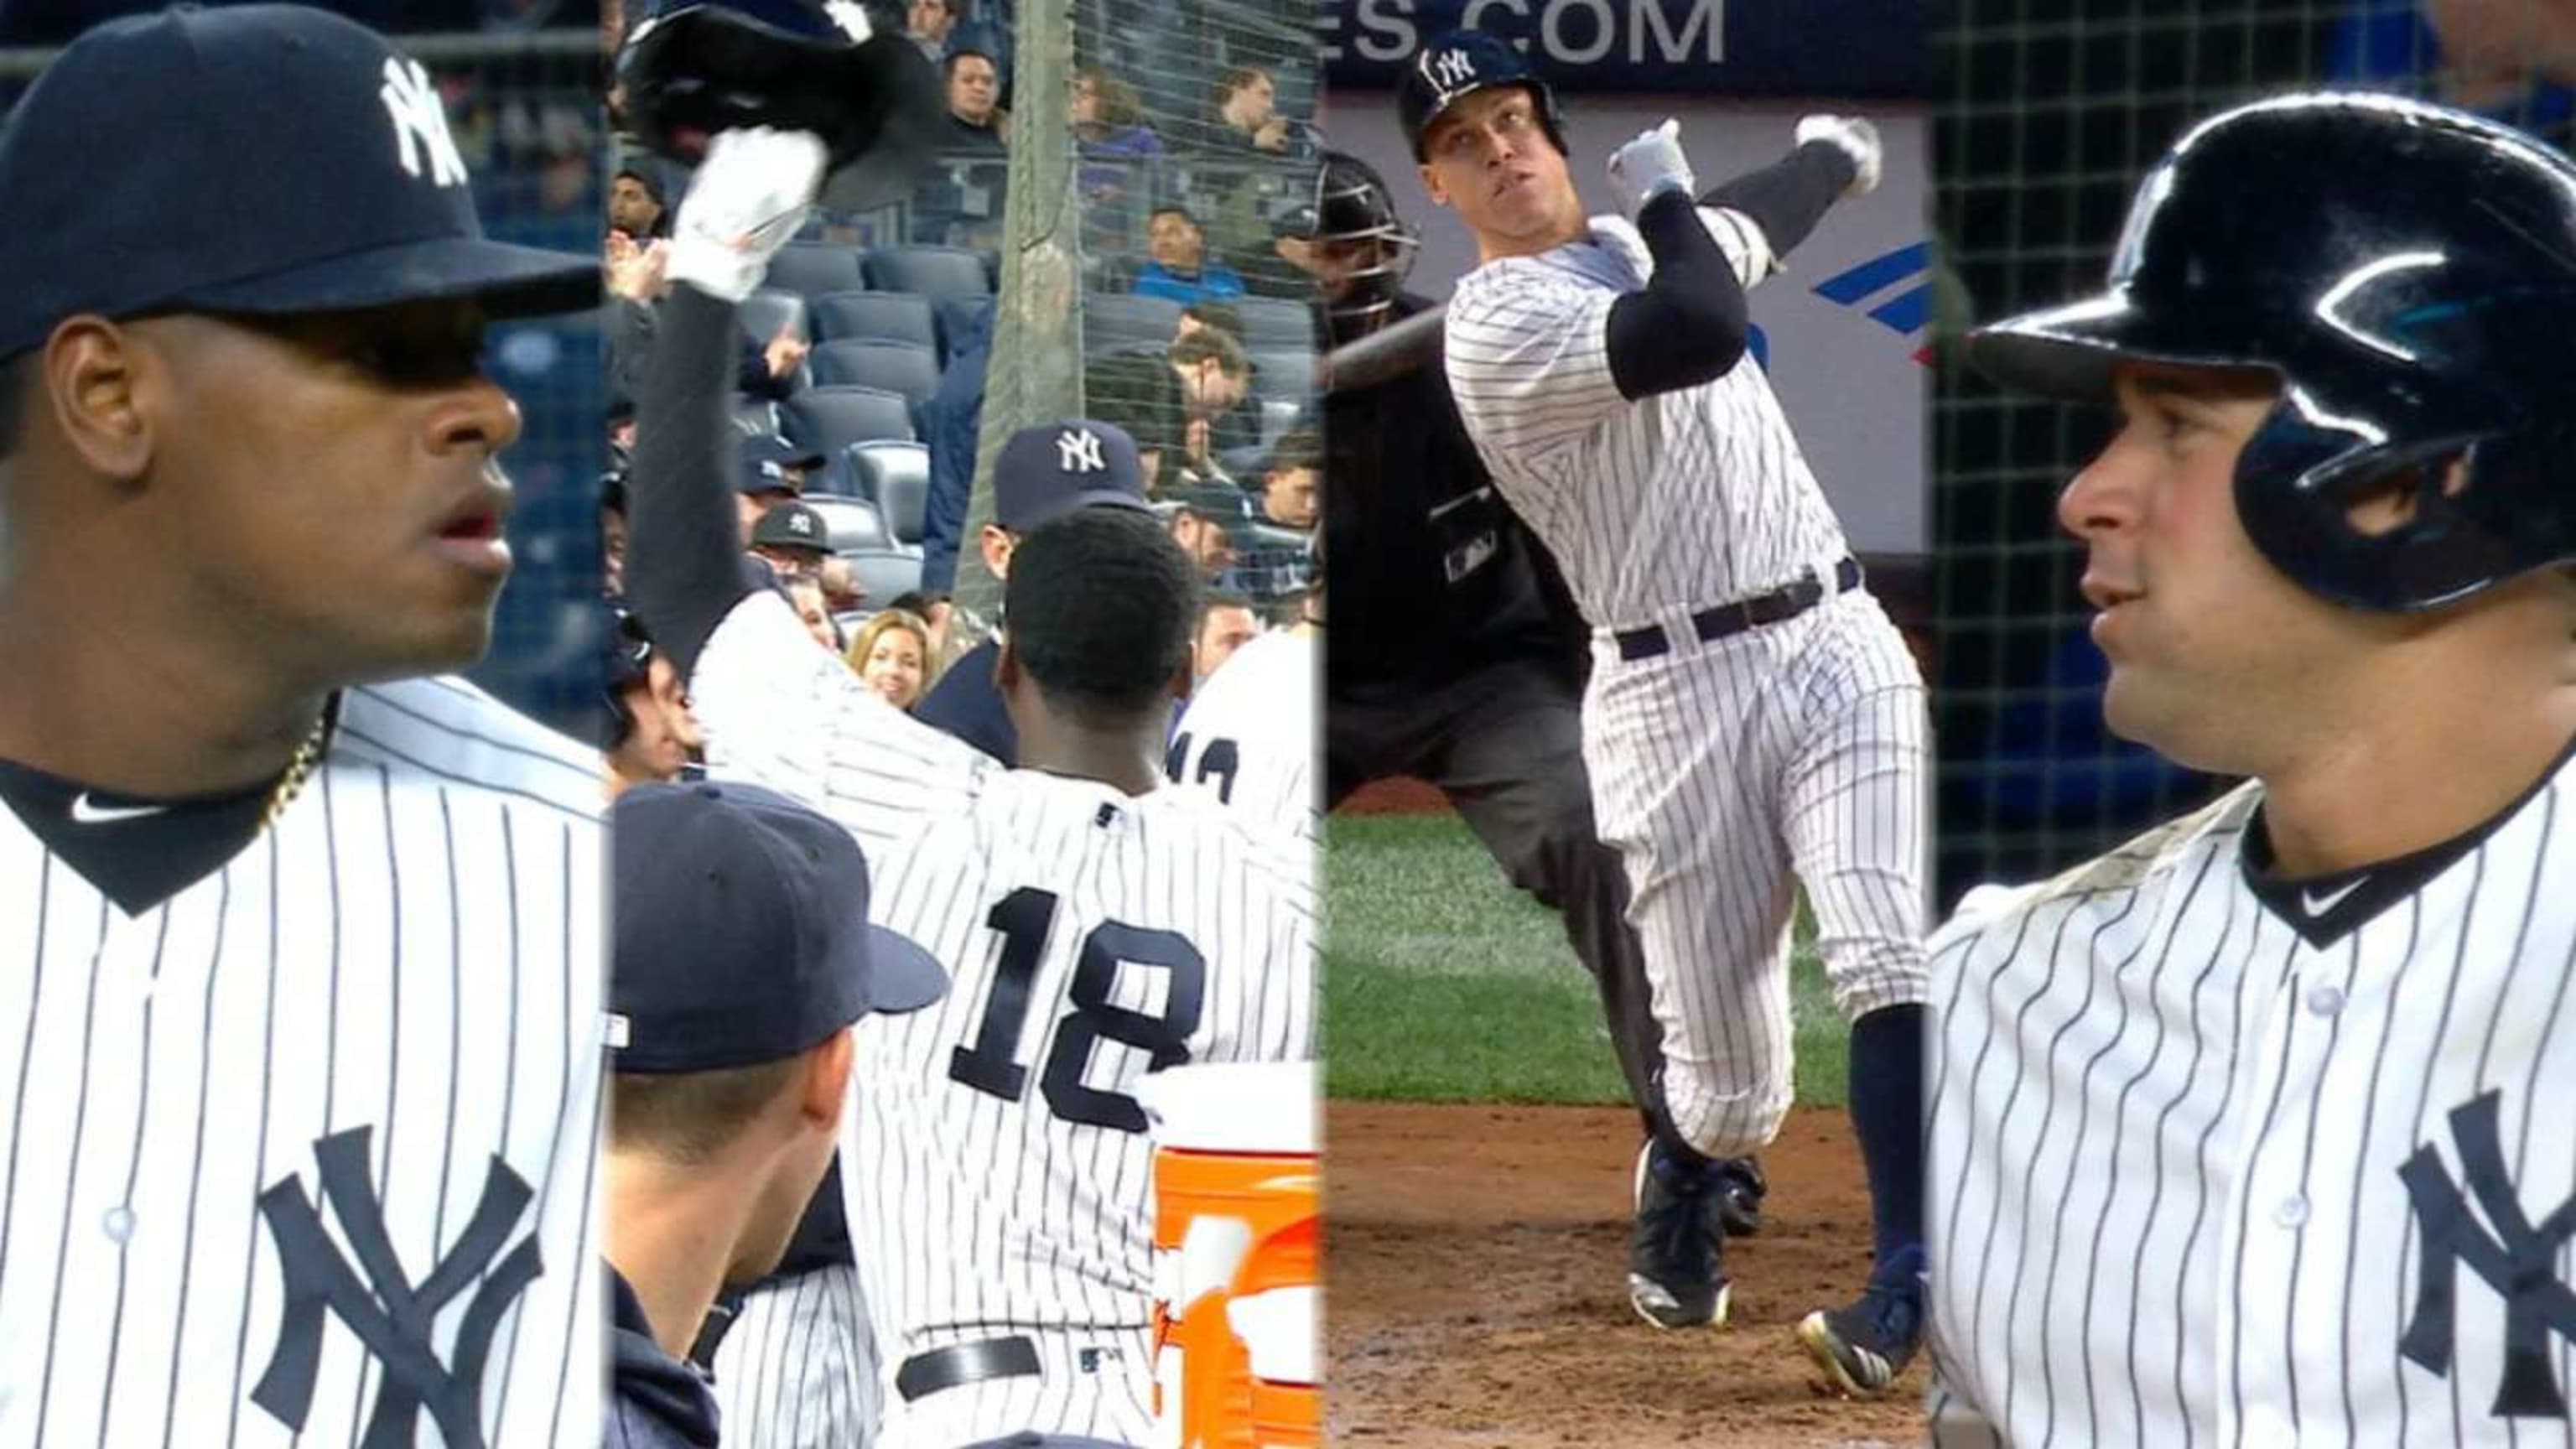 ESPN Stats & Info on X: Aaron Judge just hit his 60th HR this season.  Doing so in 147 team games, Judge became the fastest Yankee to hit 60 HR in  a